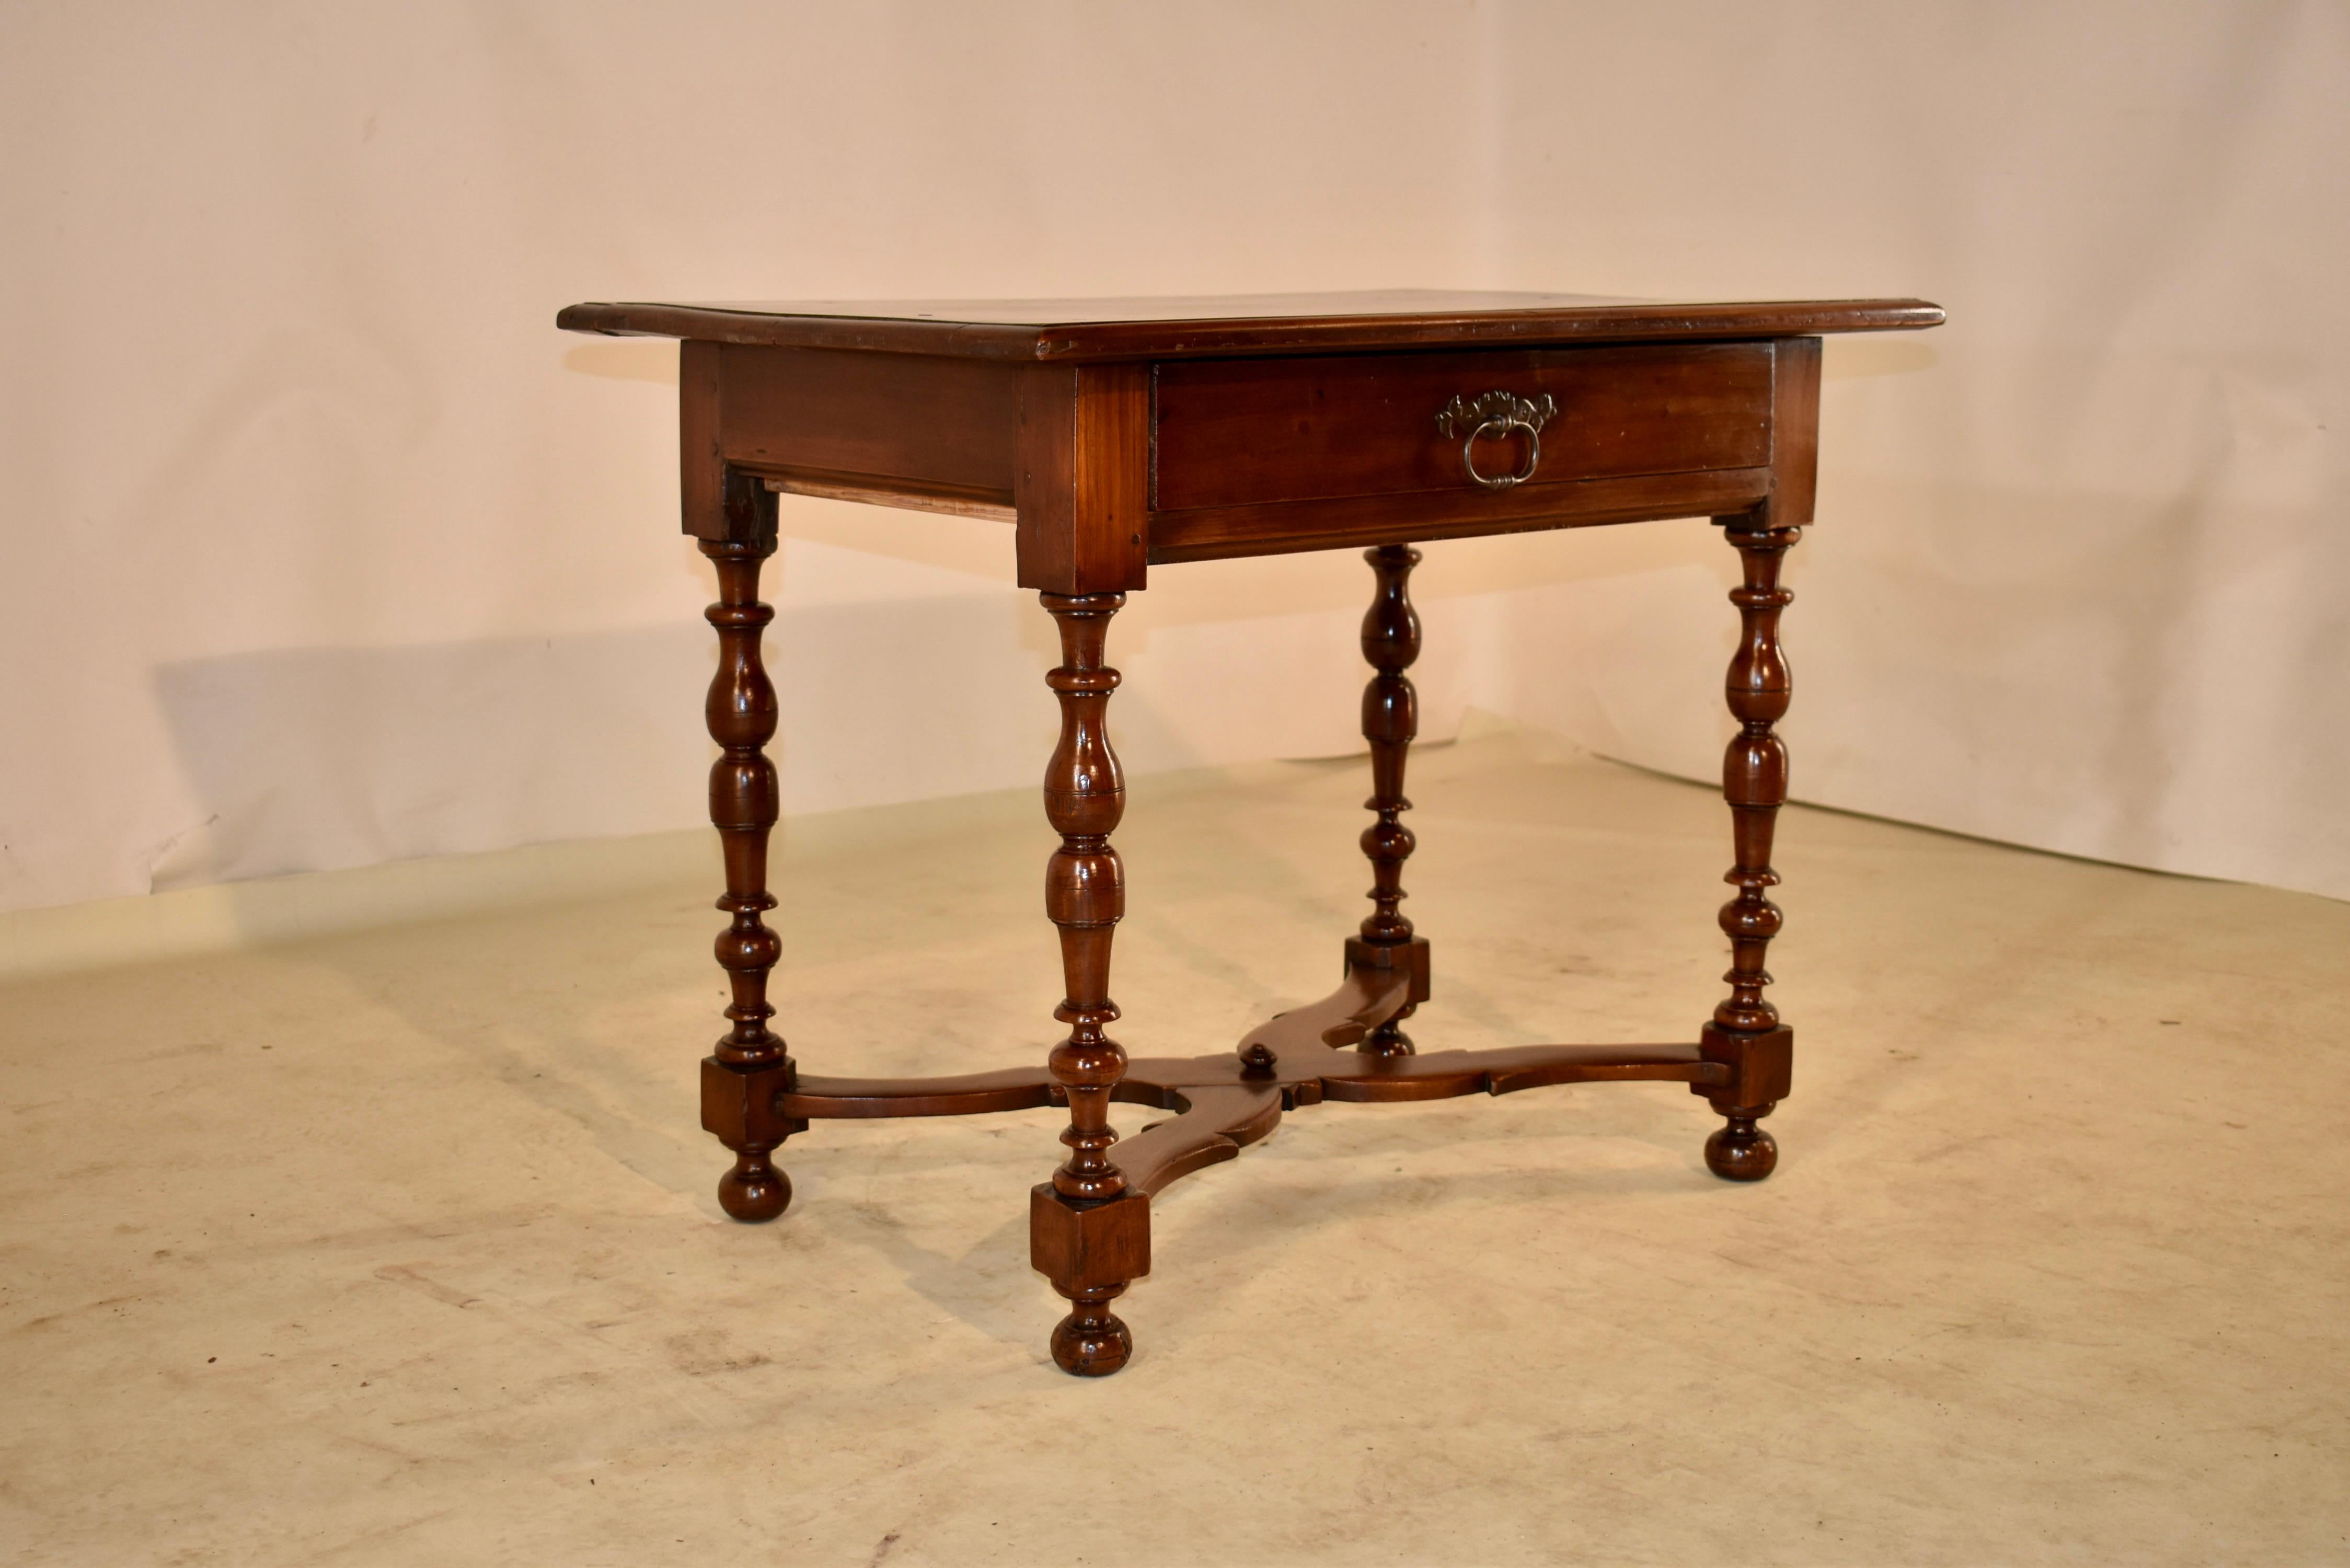 Early 18th century walnut side table from France with a two board top which has pegged construction and a beveled edge, following down to simple sides and a single drawer in the front. The table is supported on hand turned legs, joined by serpentine